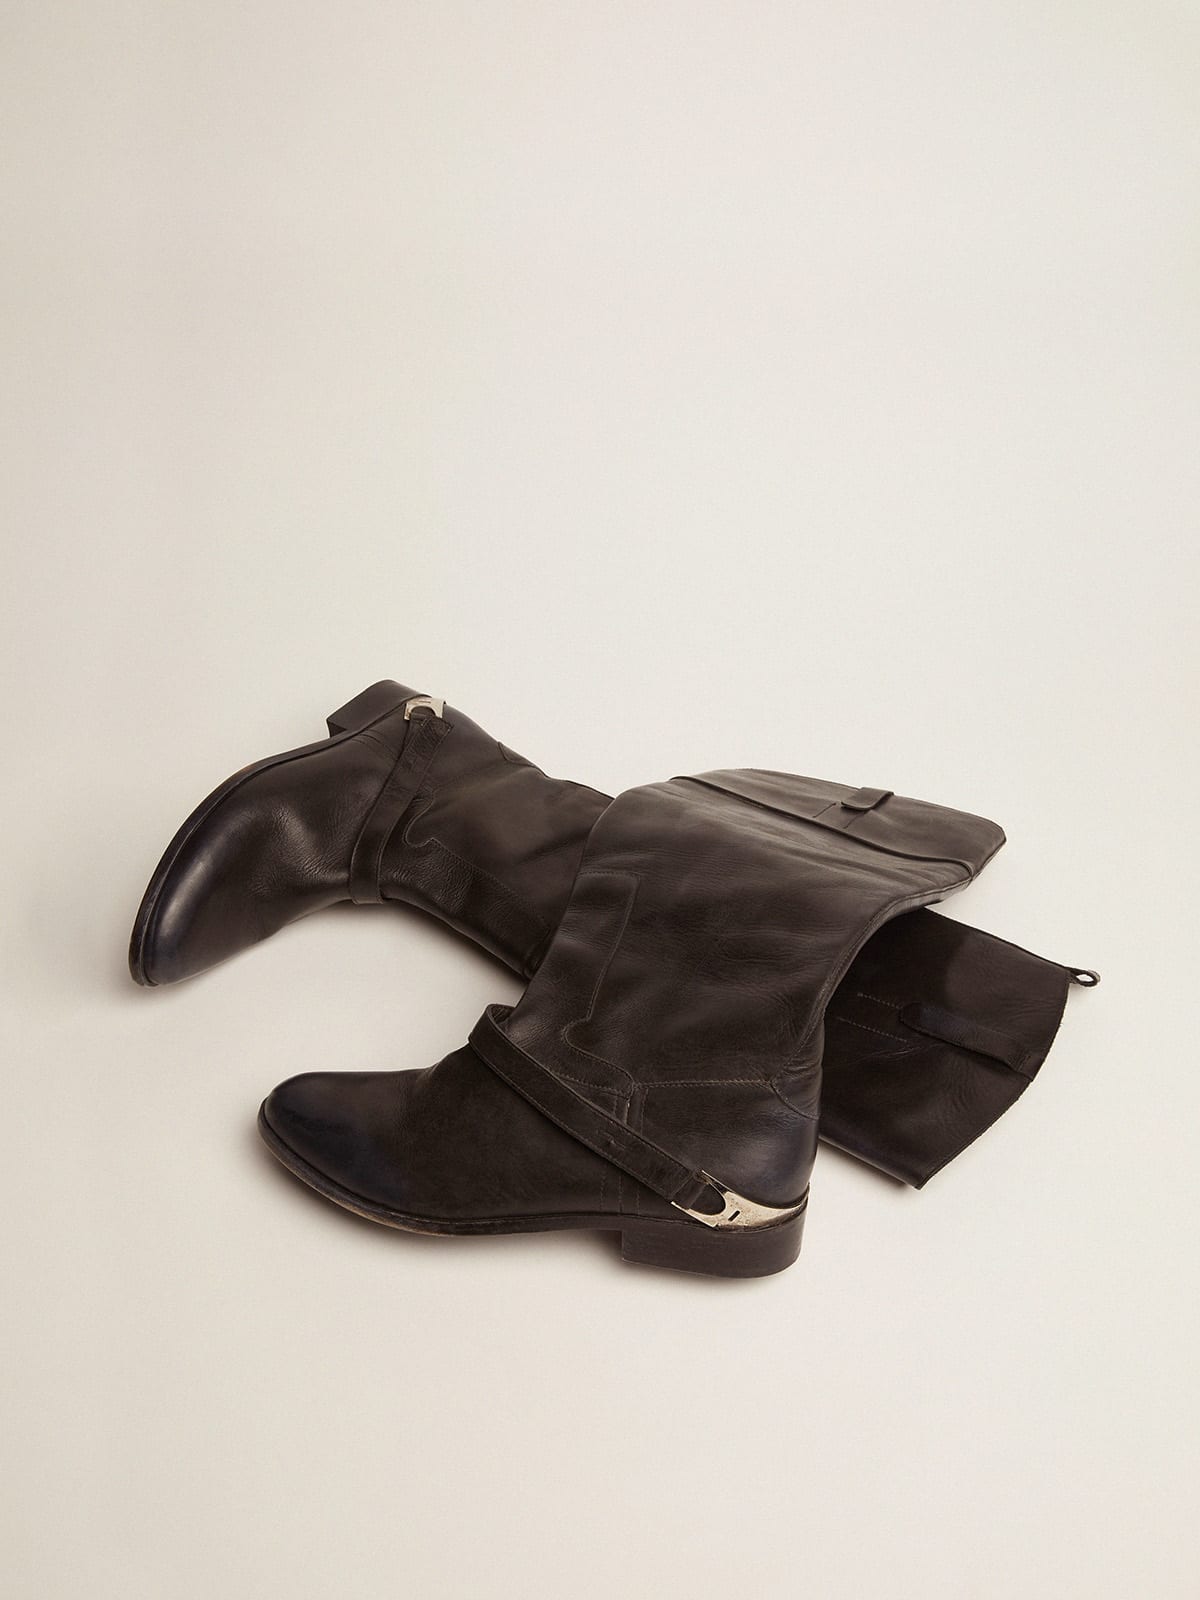 Golden Goose - Women's black leather boots with clamp on the heel in 